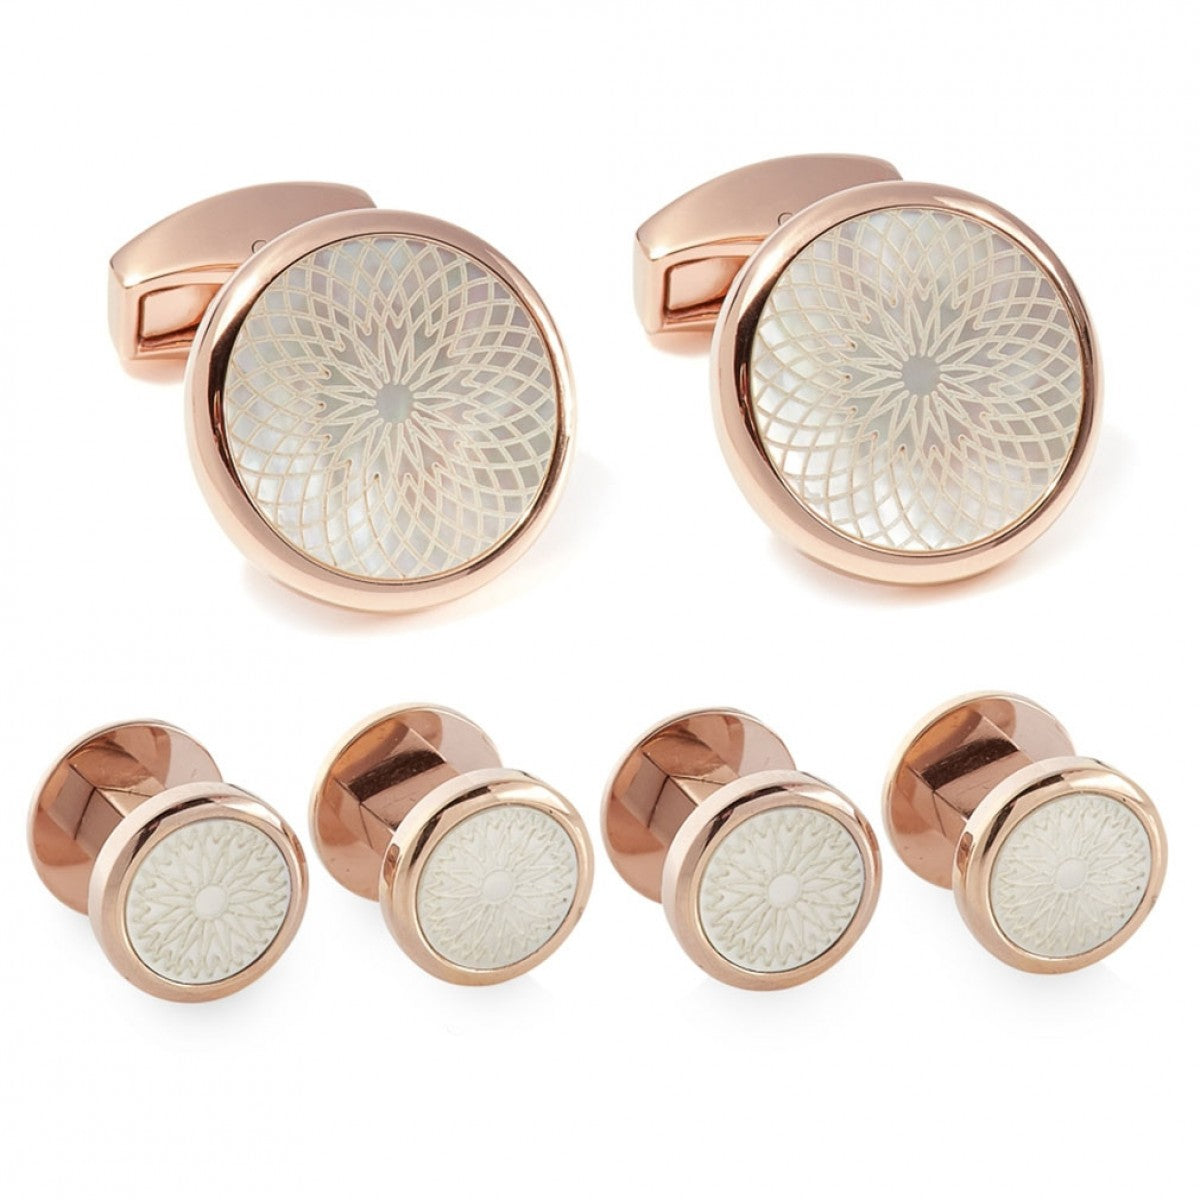 Tateossian Rotondo Guilloche IP Rose Gold Studs and Cufflinks Set, White Mother of Pearl